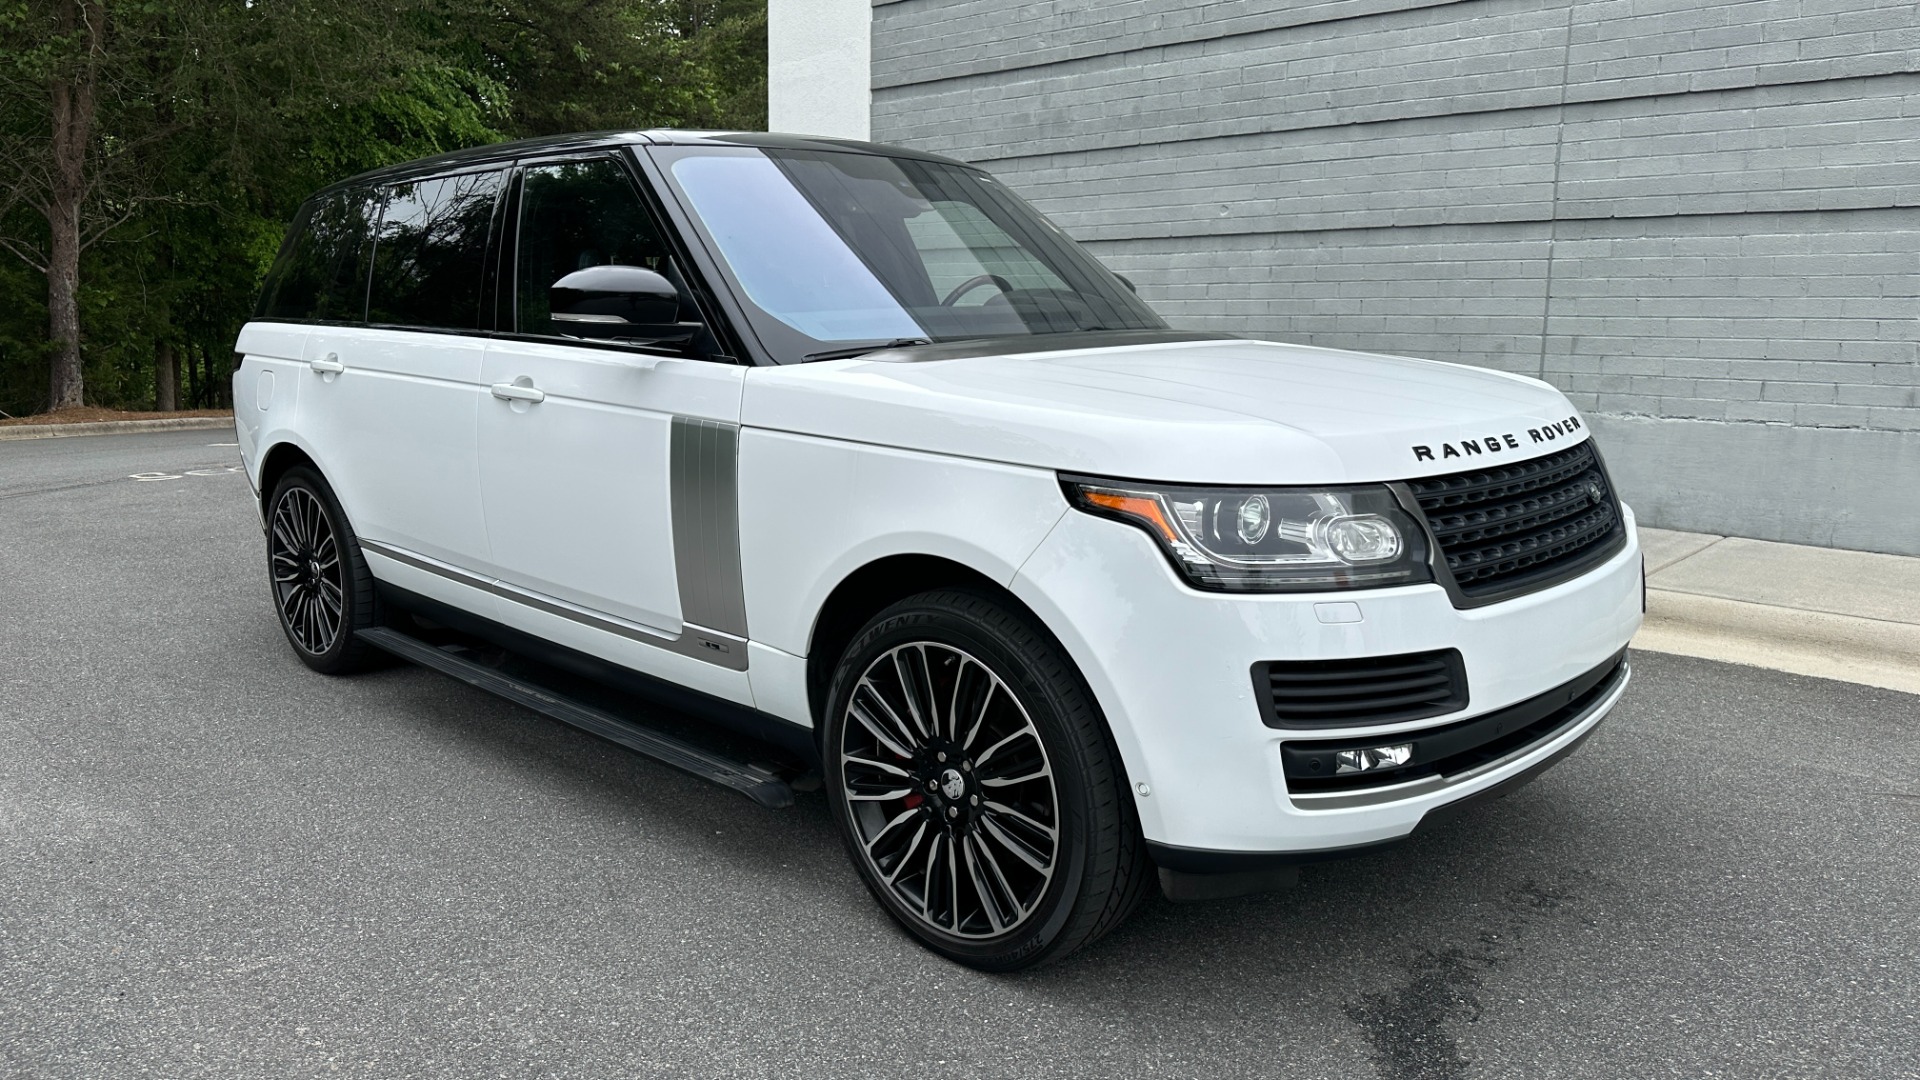 Used 2016 Land Rover Range Rover SUPERCHARGED 5.0 LWB / MERIDIAN / 22IN WHEELS / TOW PKG / CLIMATE PKG for sale $44,000 at Formula Imports in Charlotte NC 28227 5